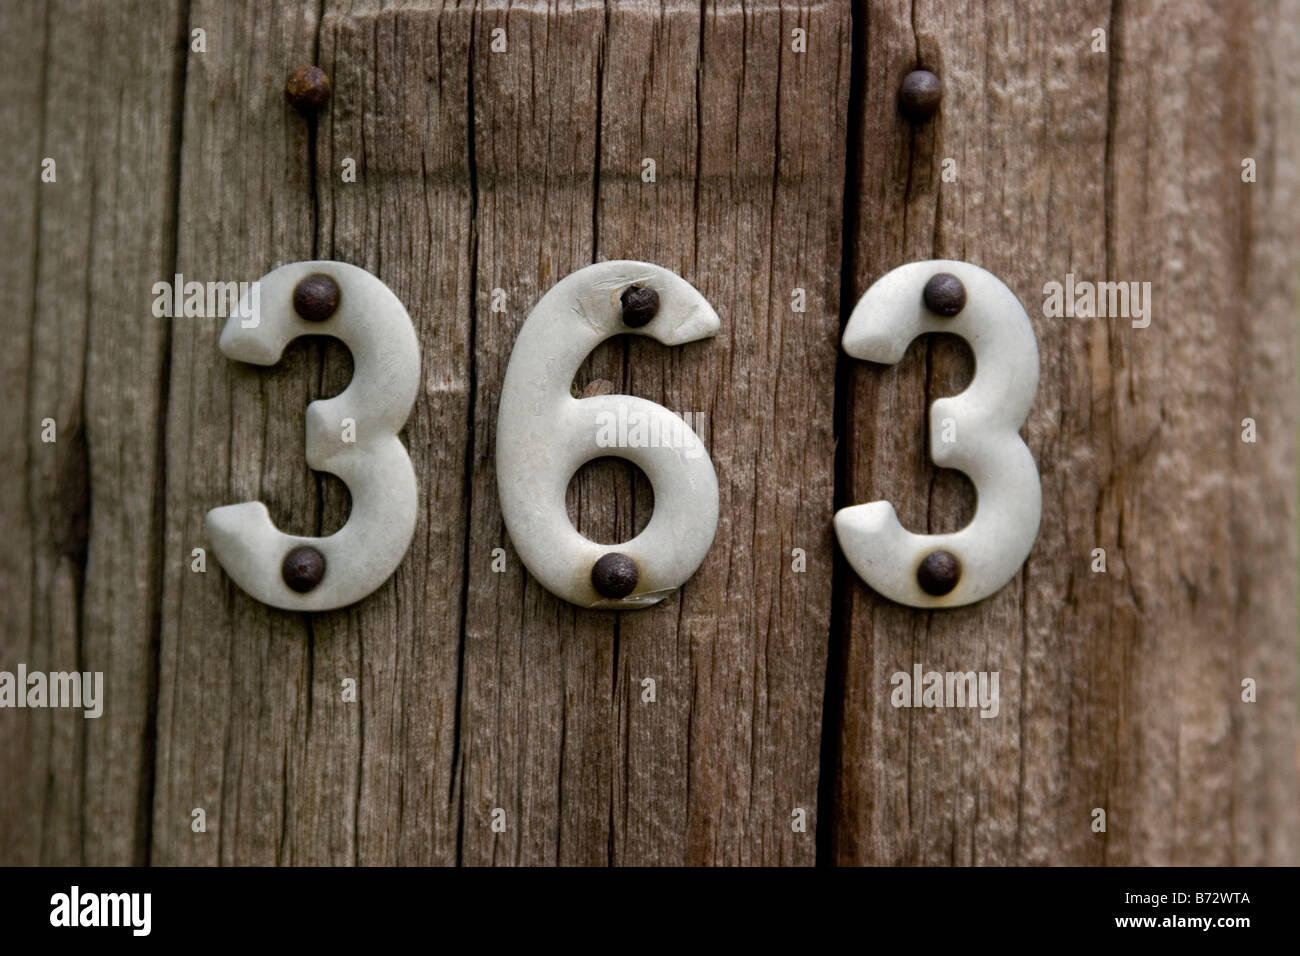 Number 363, three hundred sixty three, #363 address on wooden fence post Stock Photo